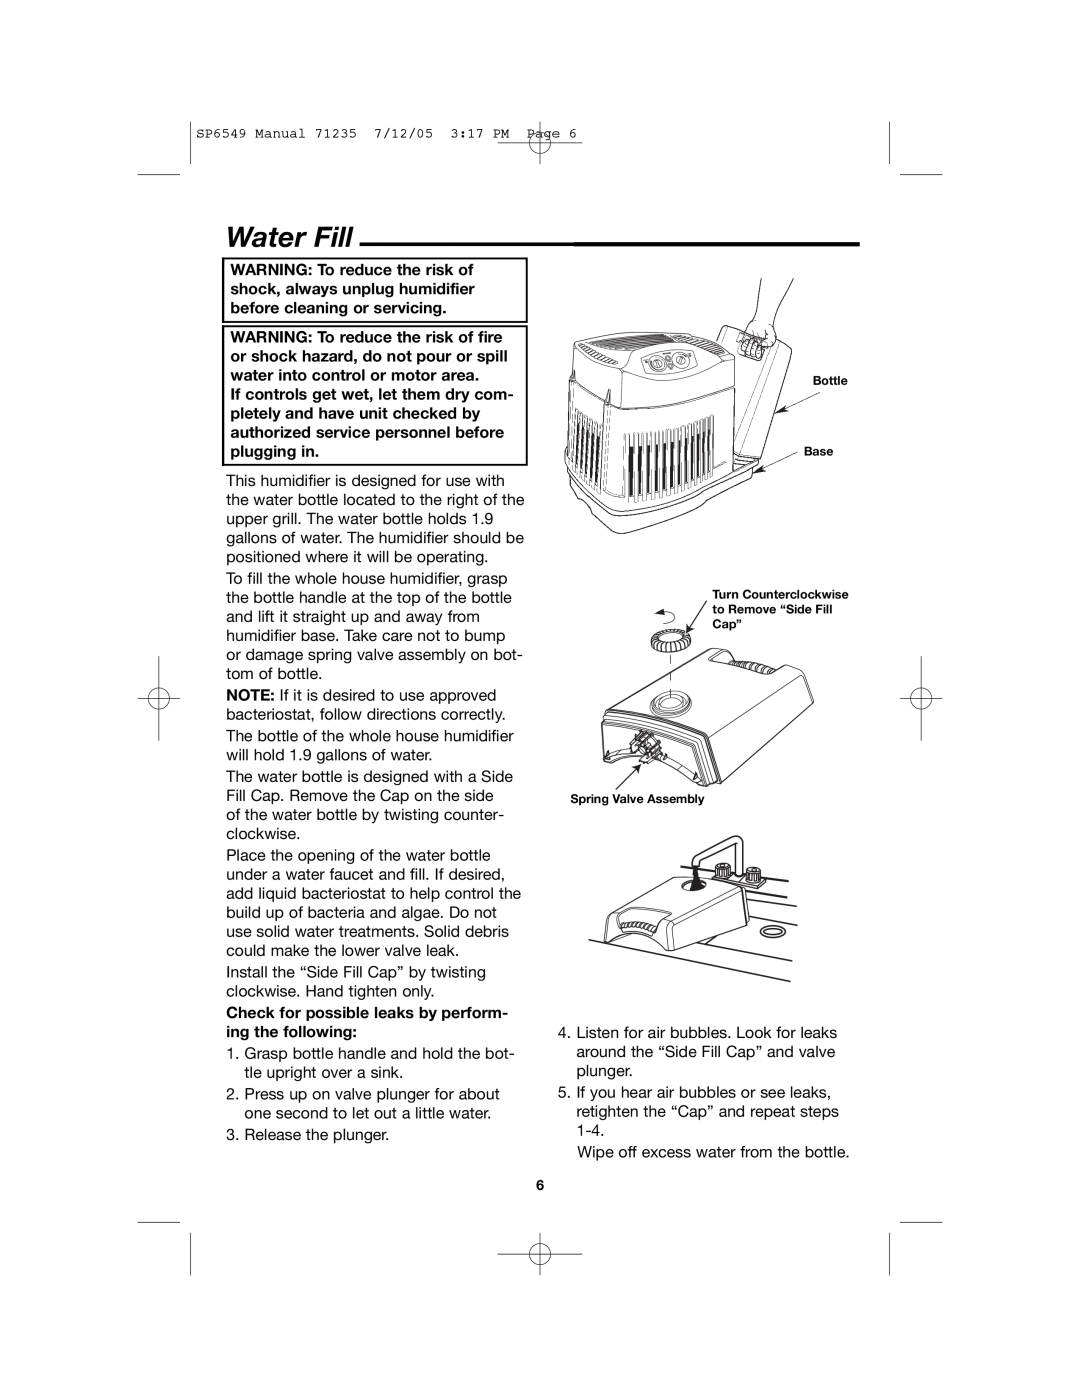 MoistAir MA 0950 owner manual Water Fill 